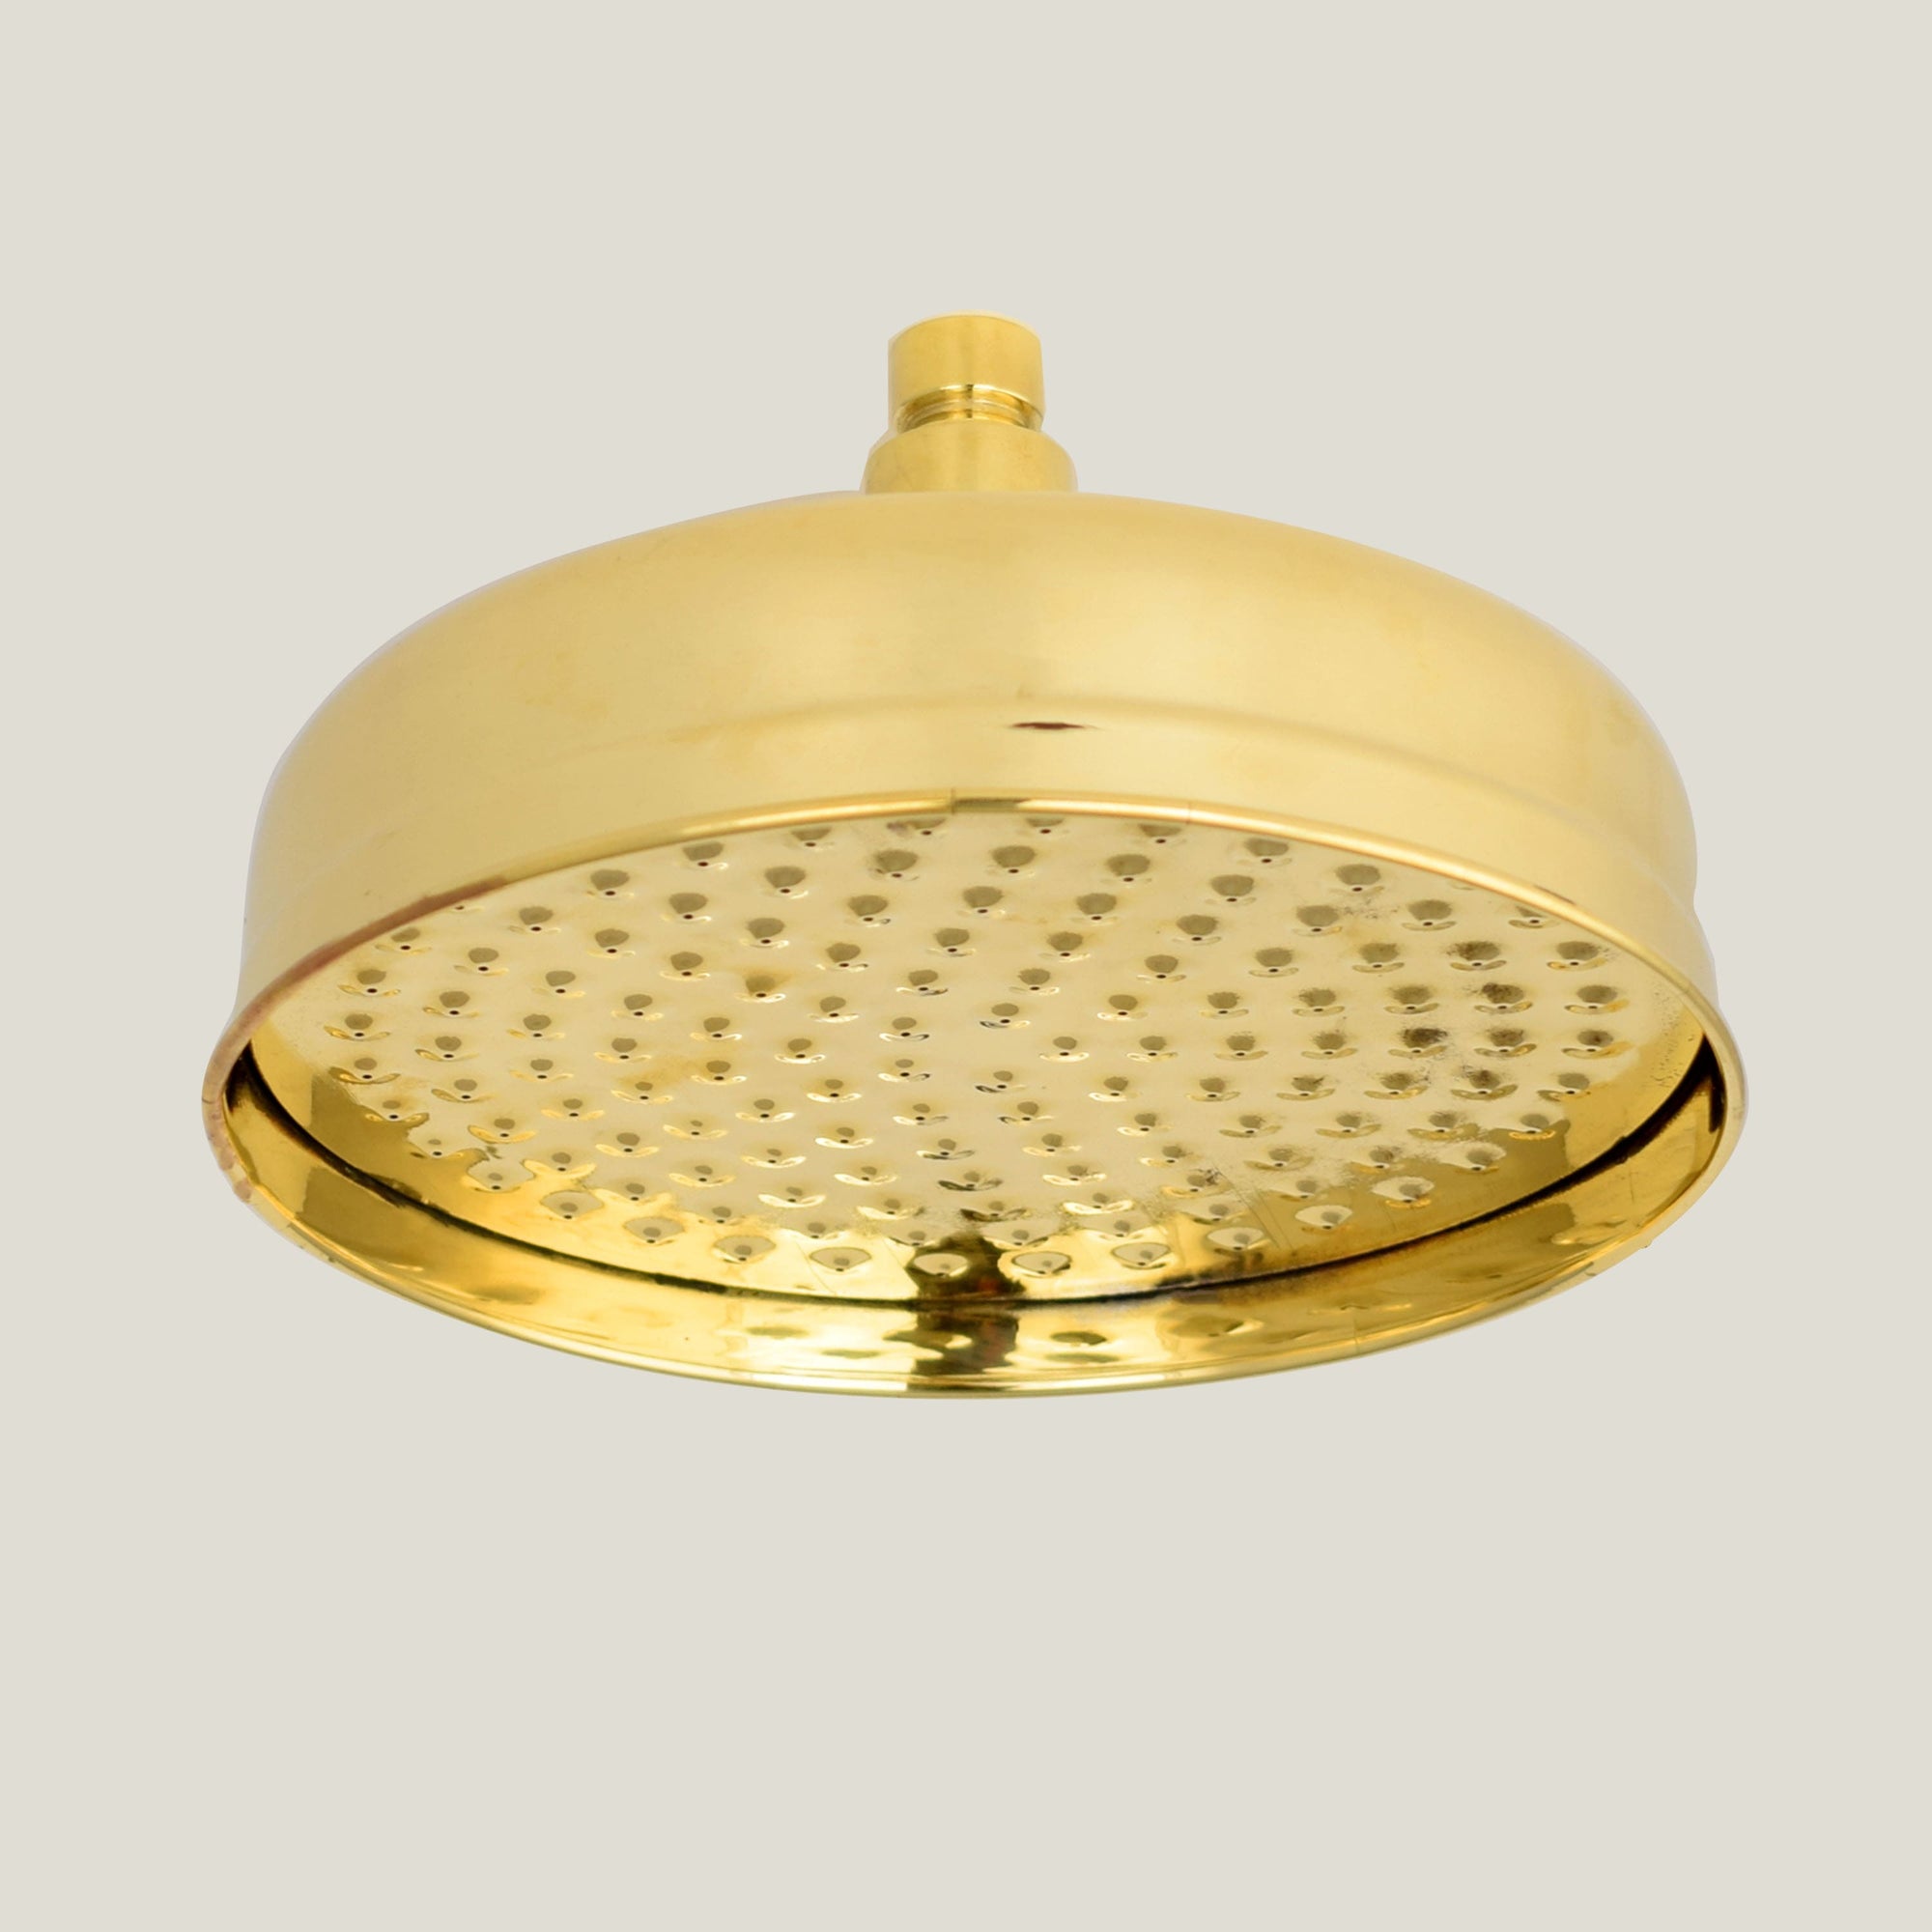 A vintage-inspired brass shower head with a bell-shaped design and a soft rain spray pattern.